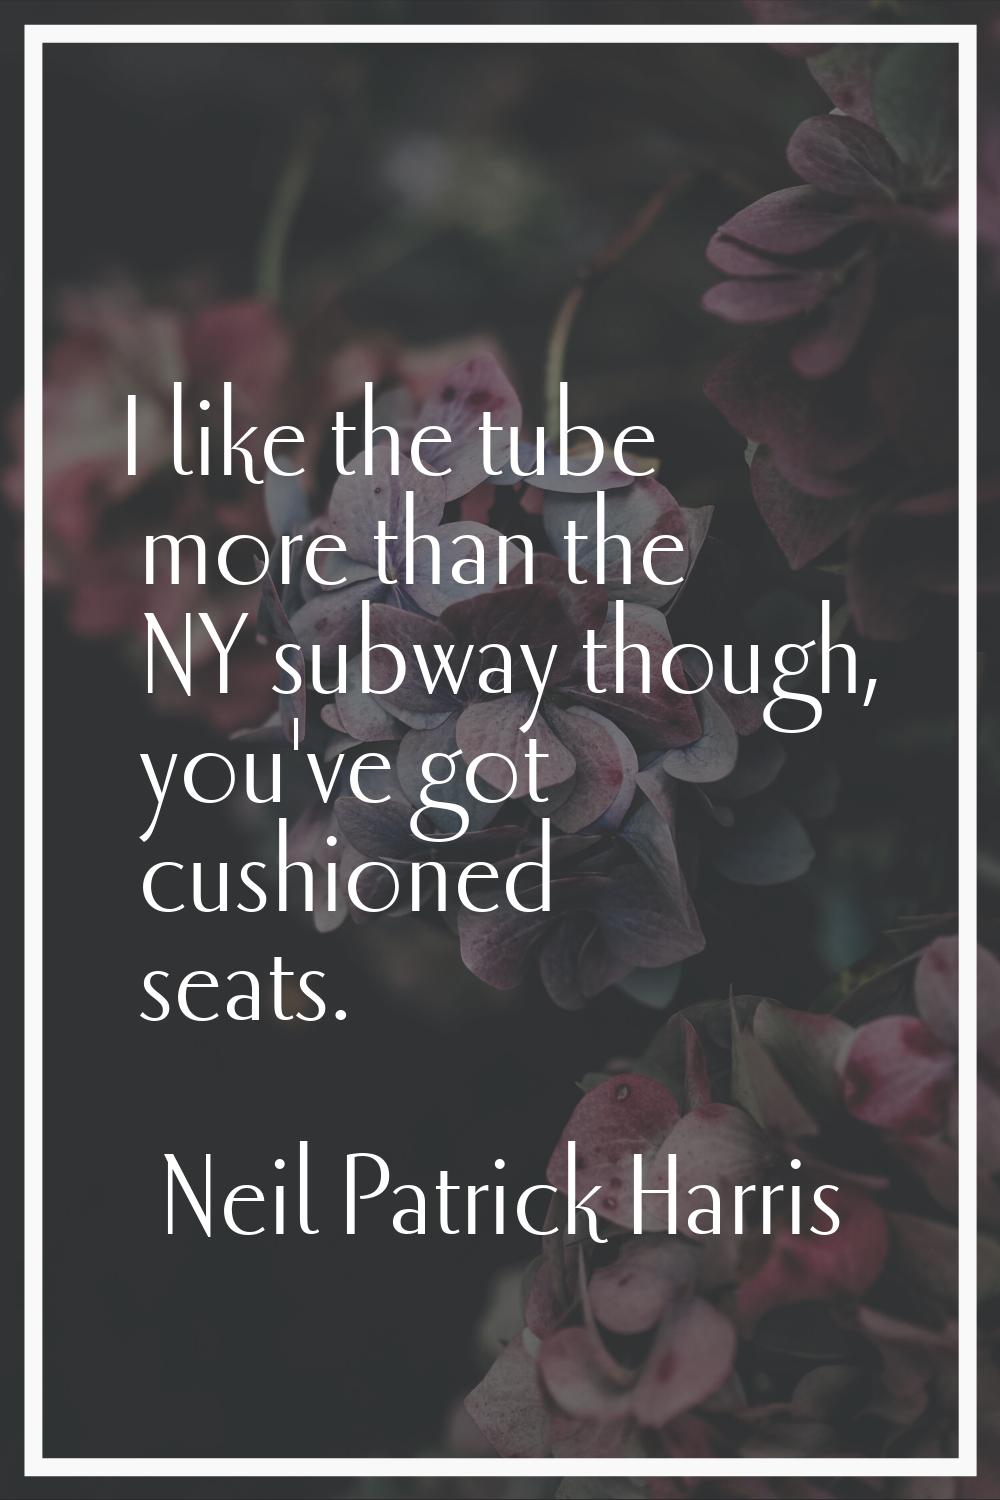 I like the tube more than the NY subway though, you've got cushioned seats.